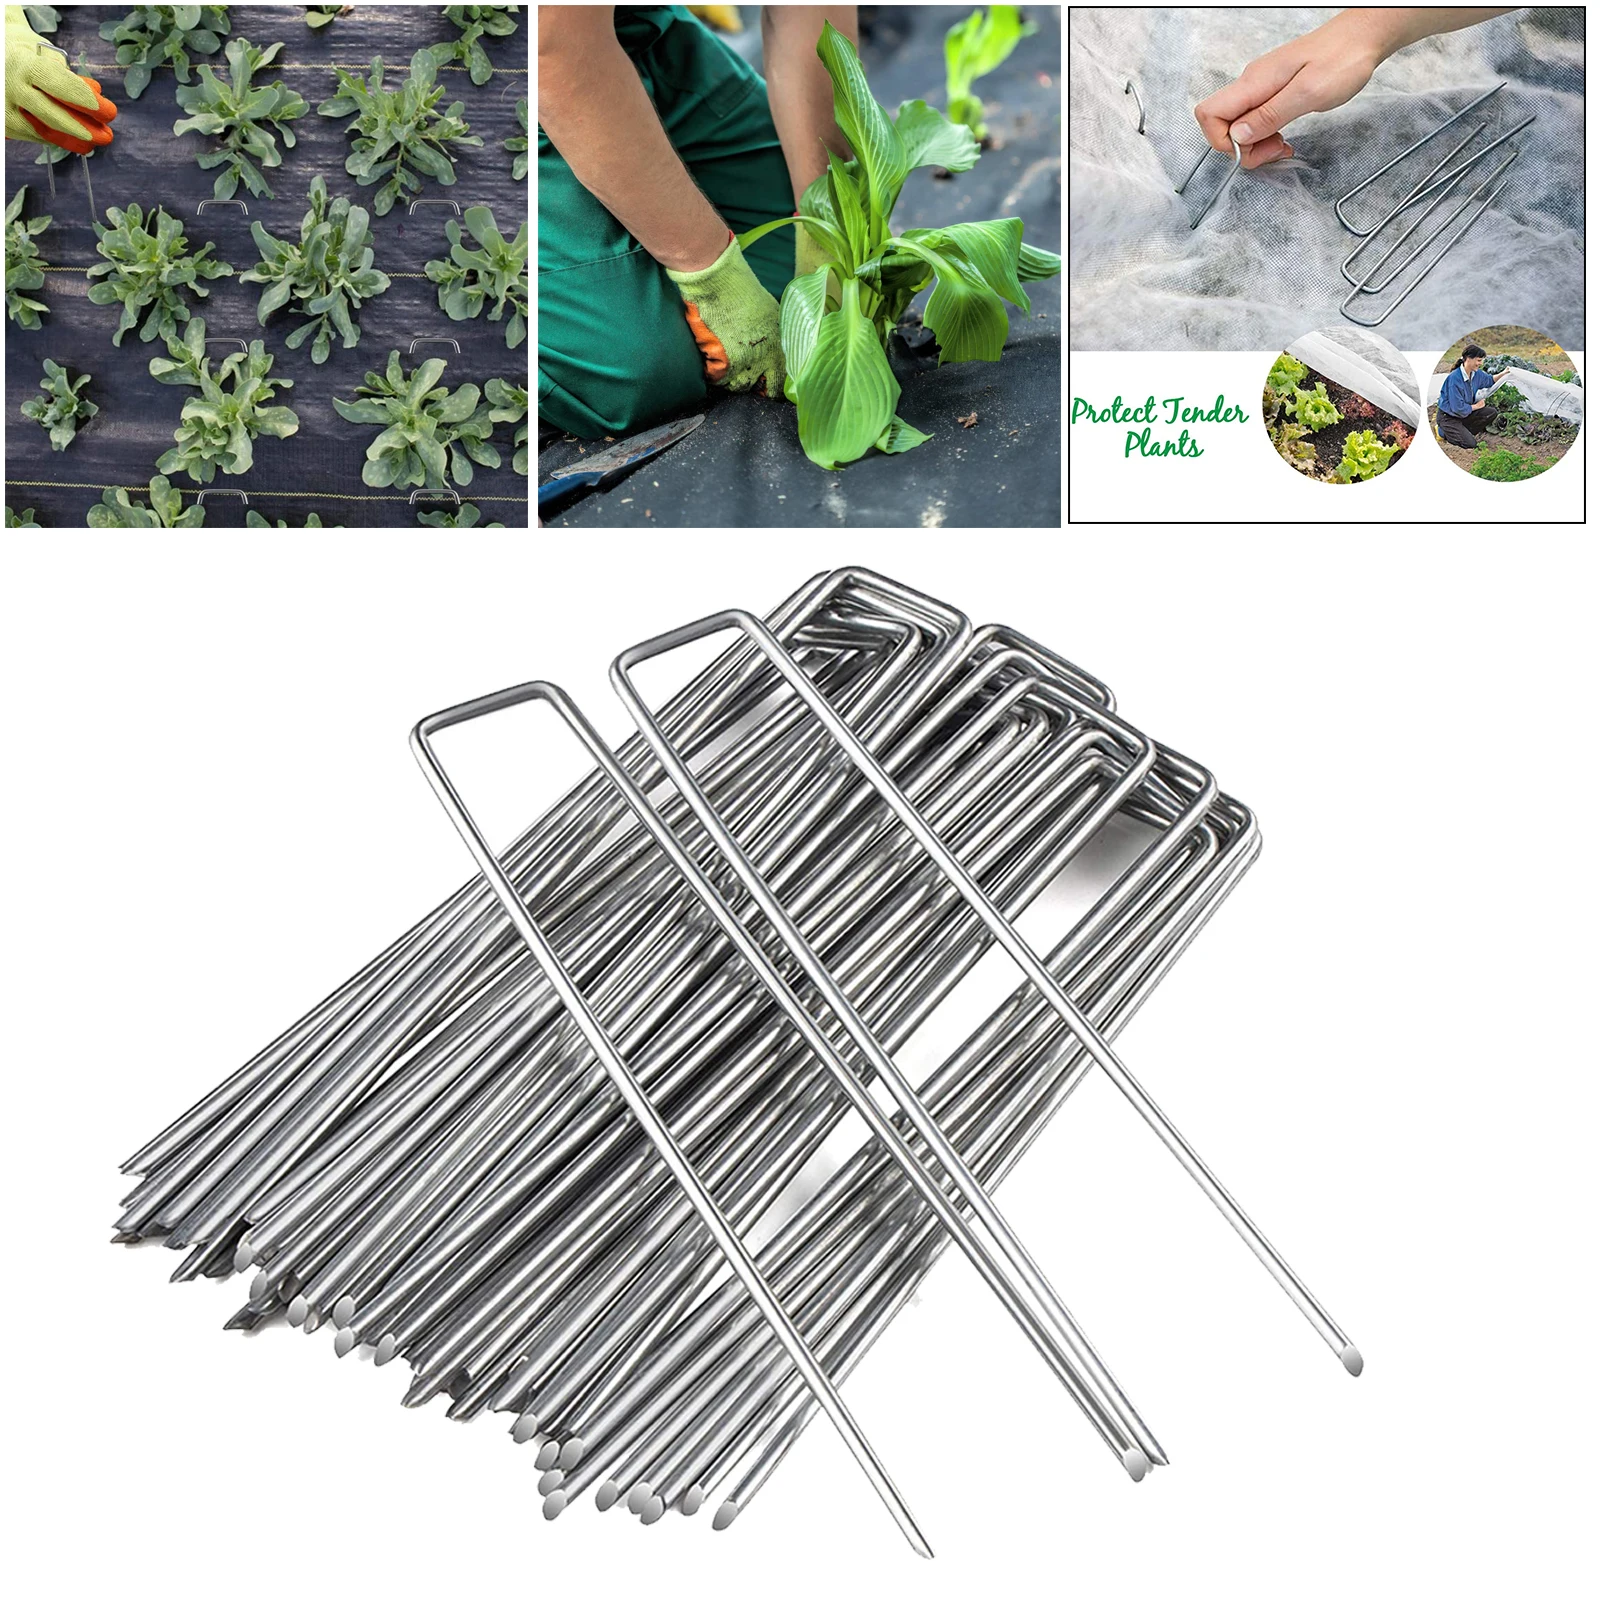 5 Galvanised  Stakes  Turf Staples for Artificial Grass Outdoor Wires Cords Tents Tarps